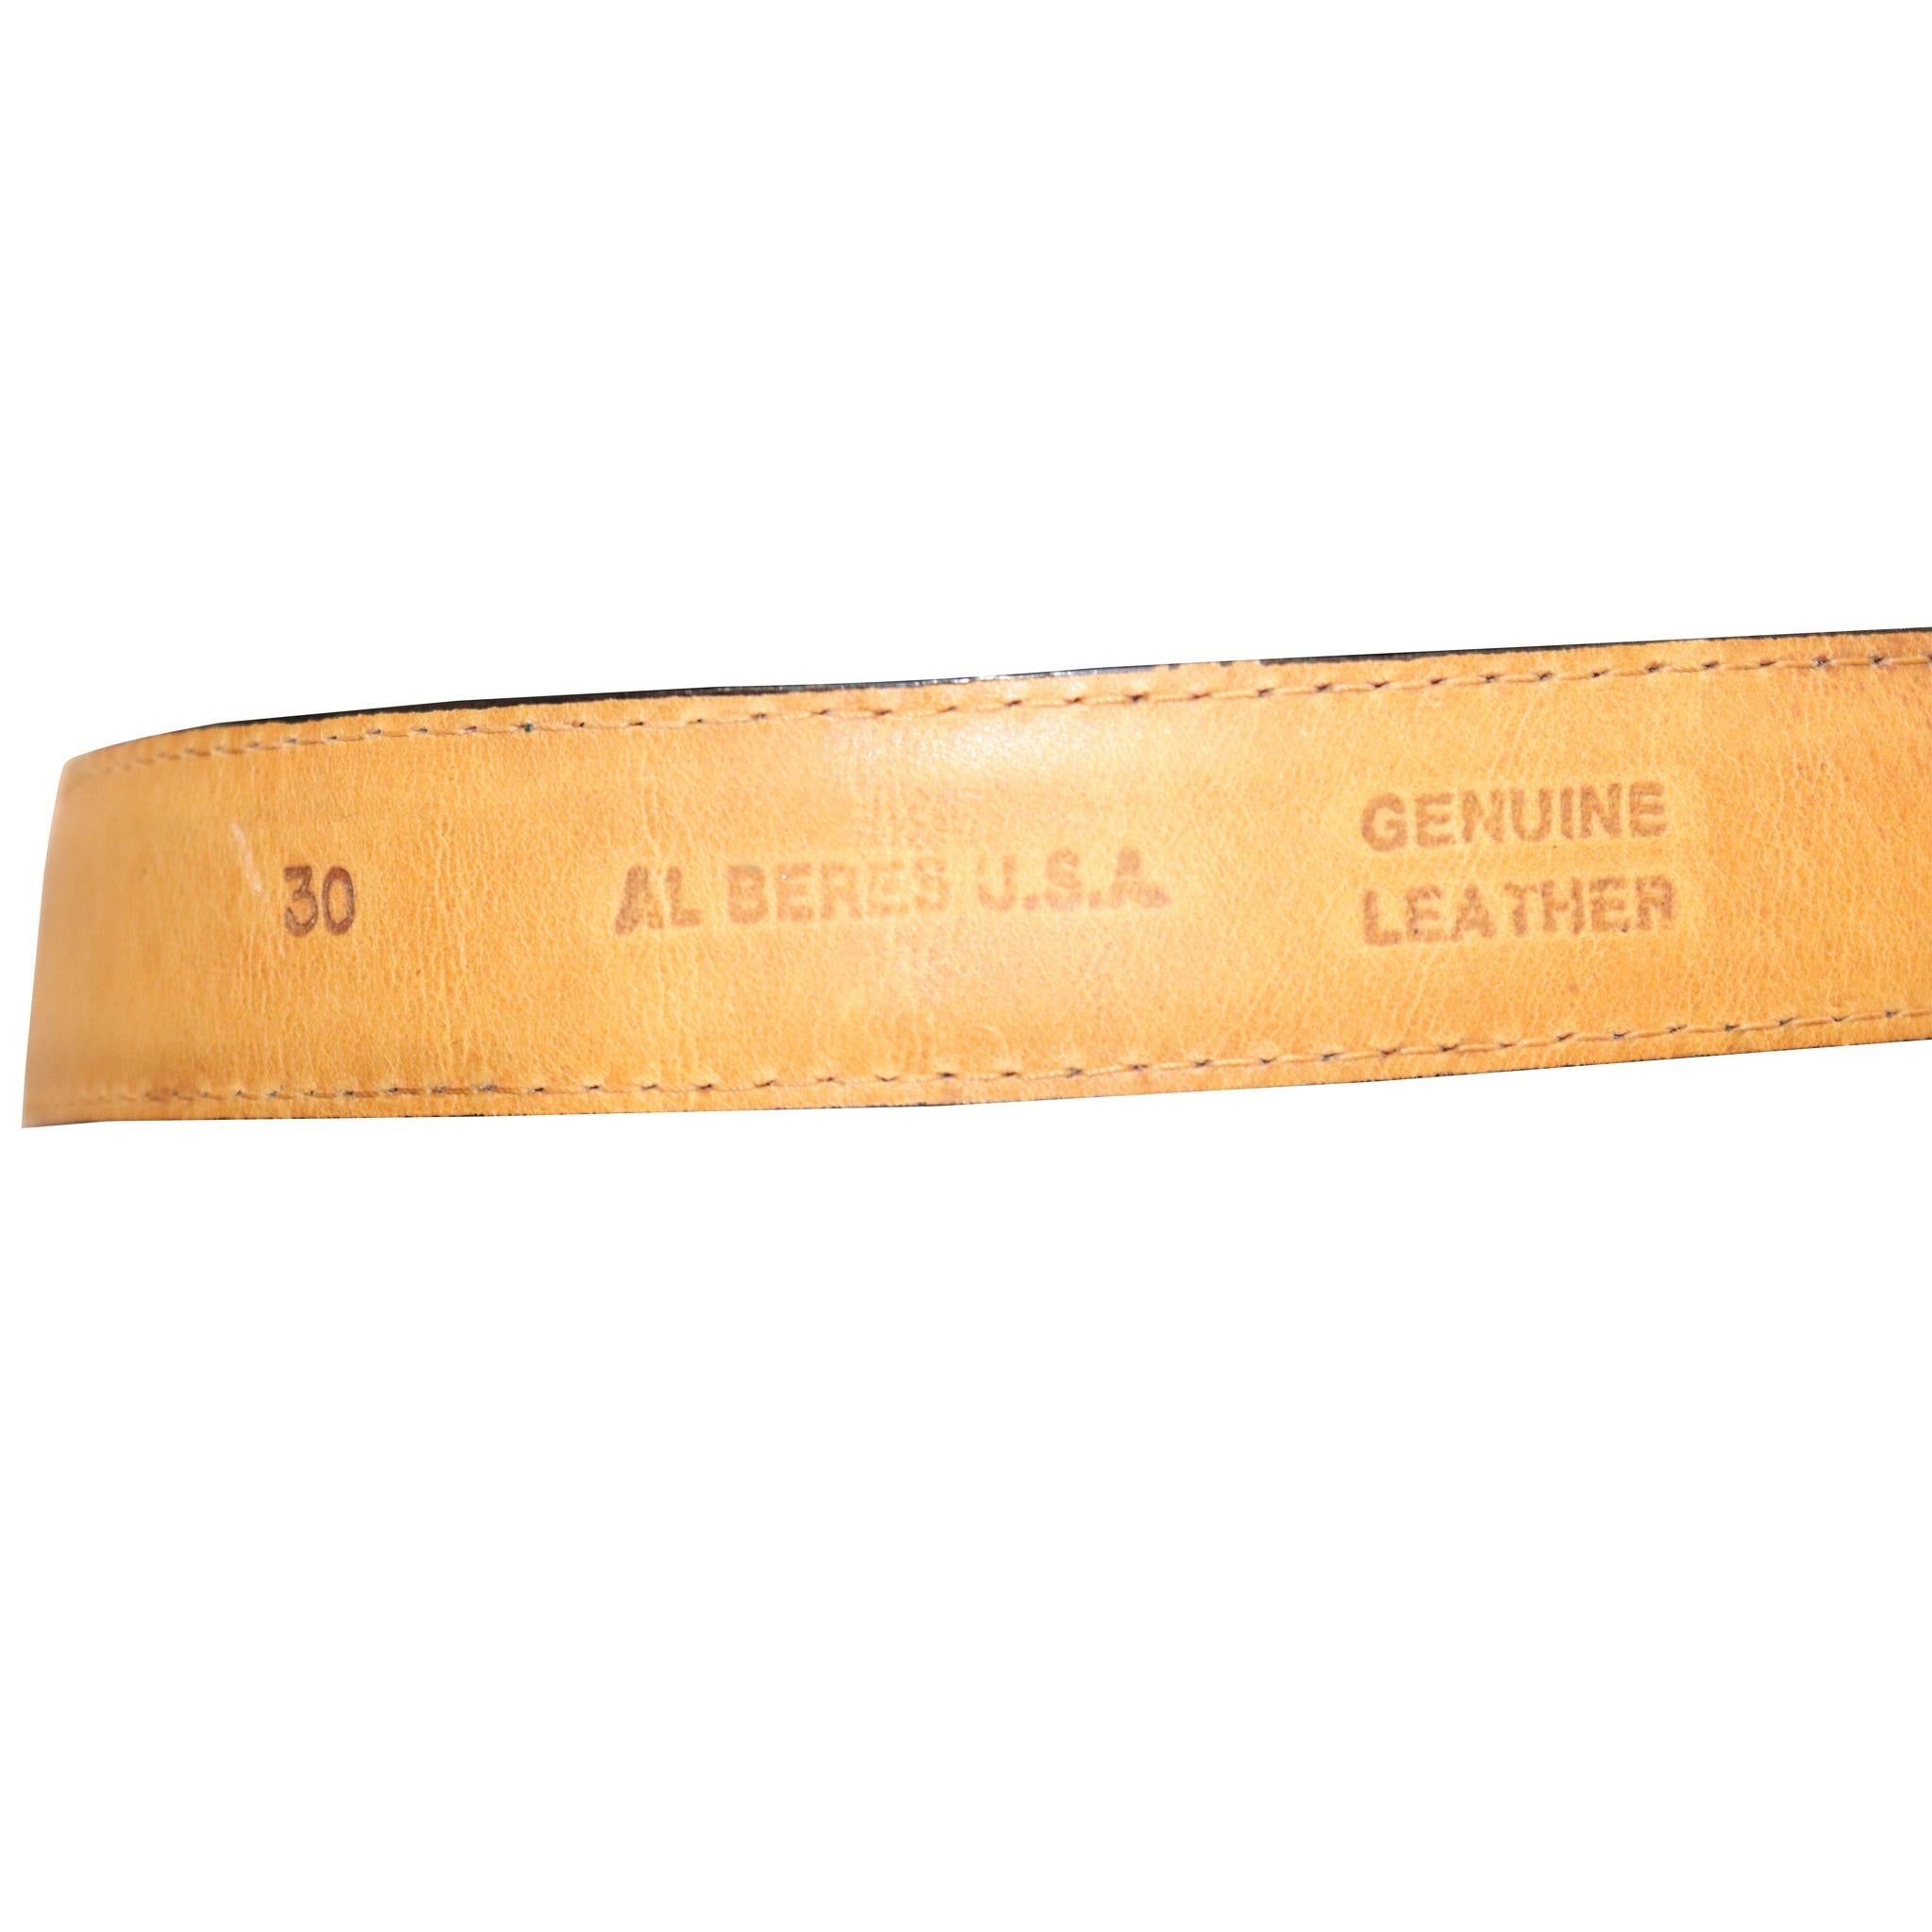 Alberes Black Leather Belt W/ Gold Accents For Sale 3